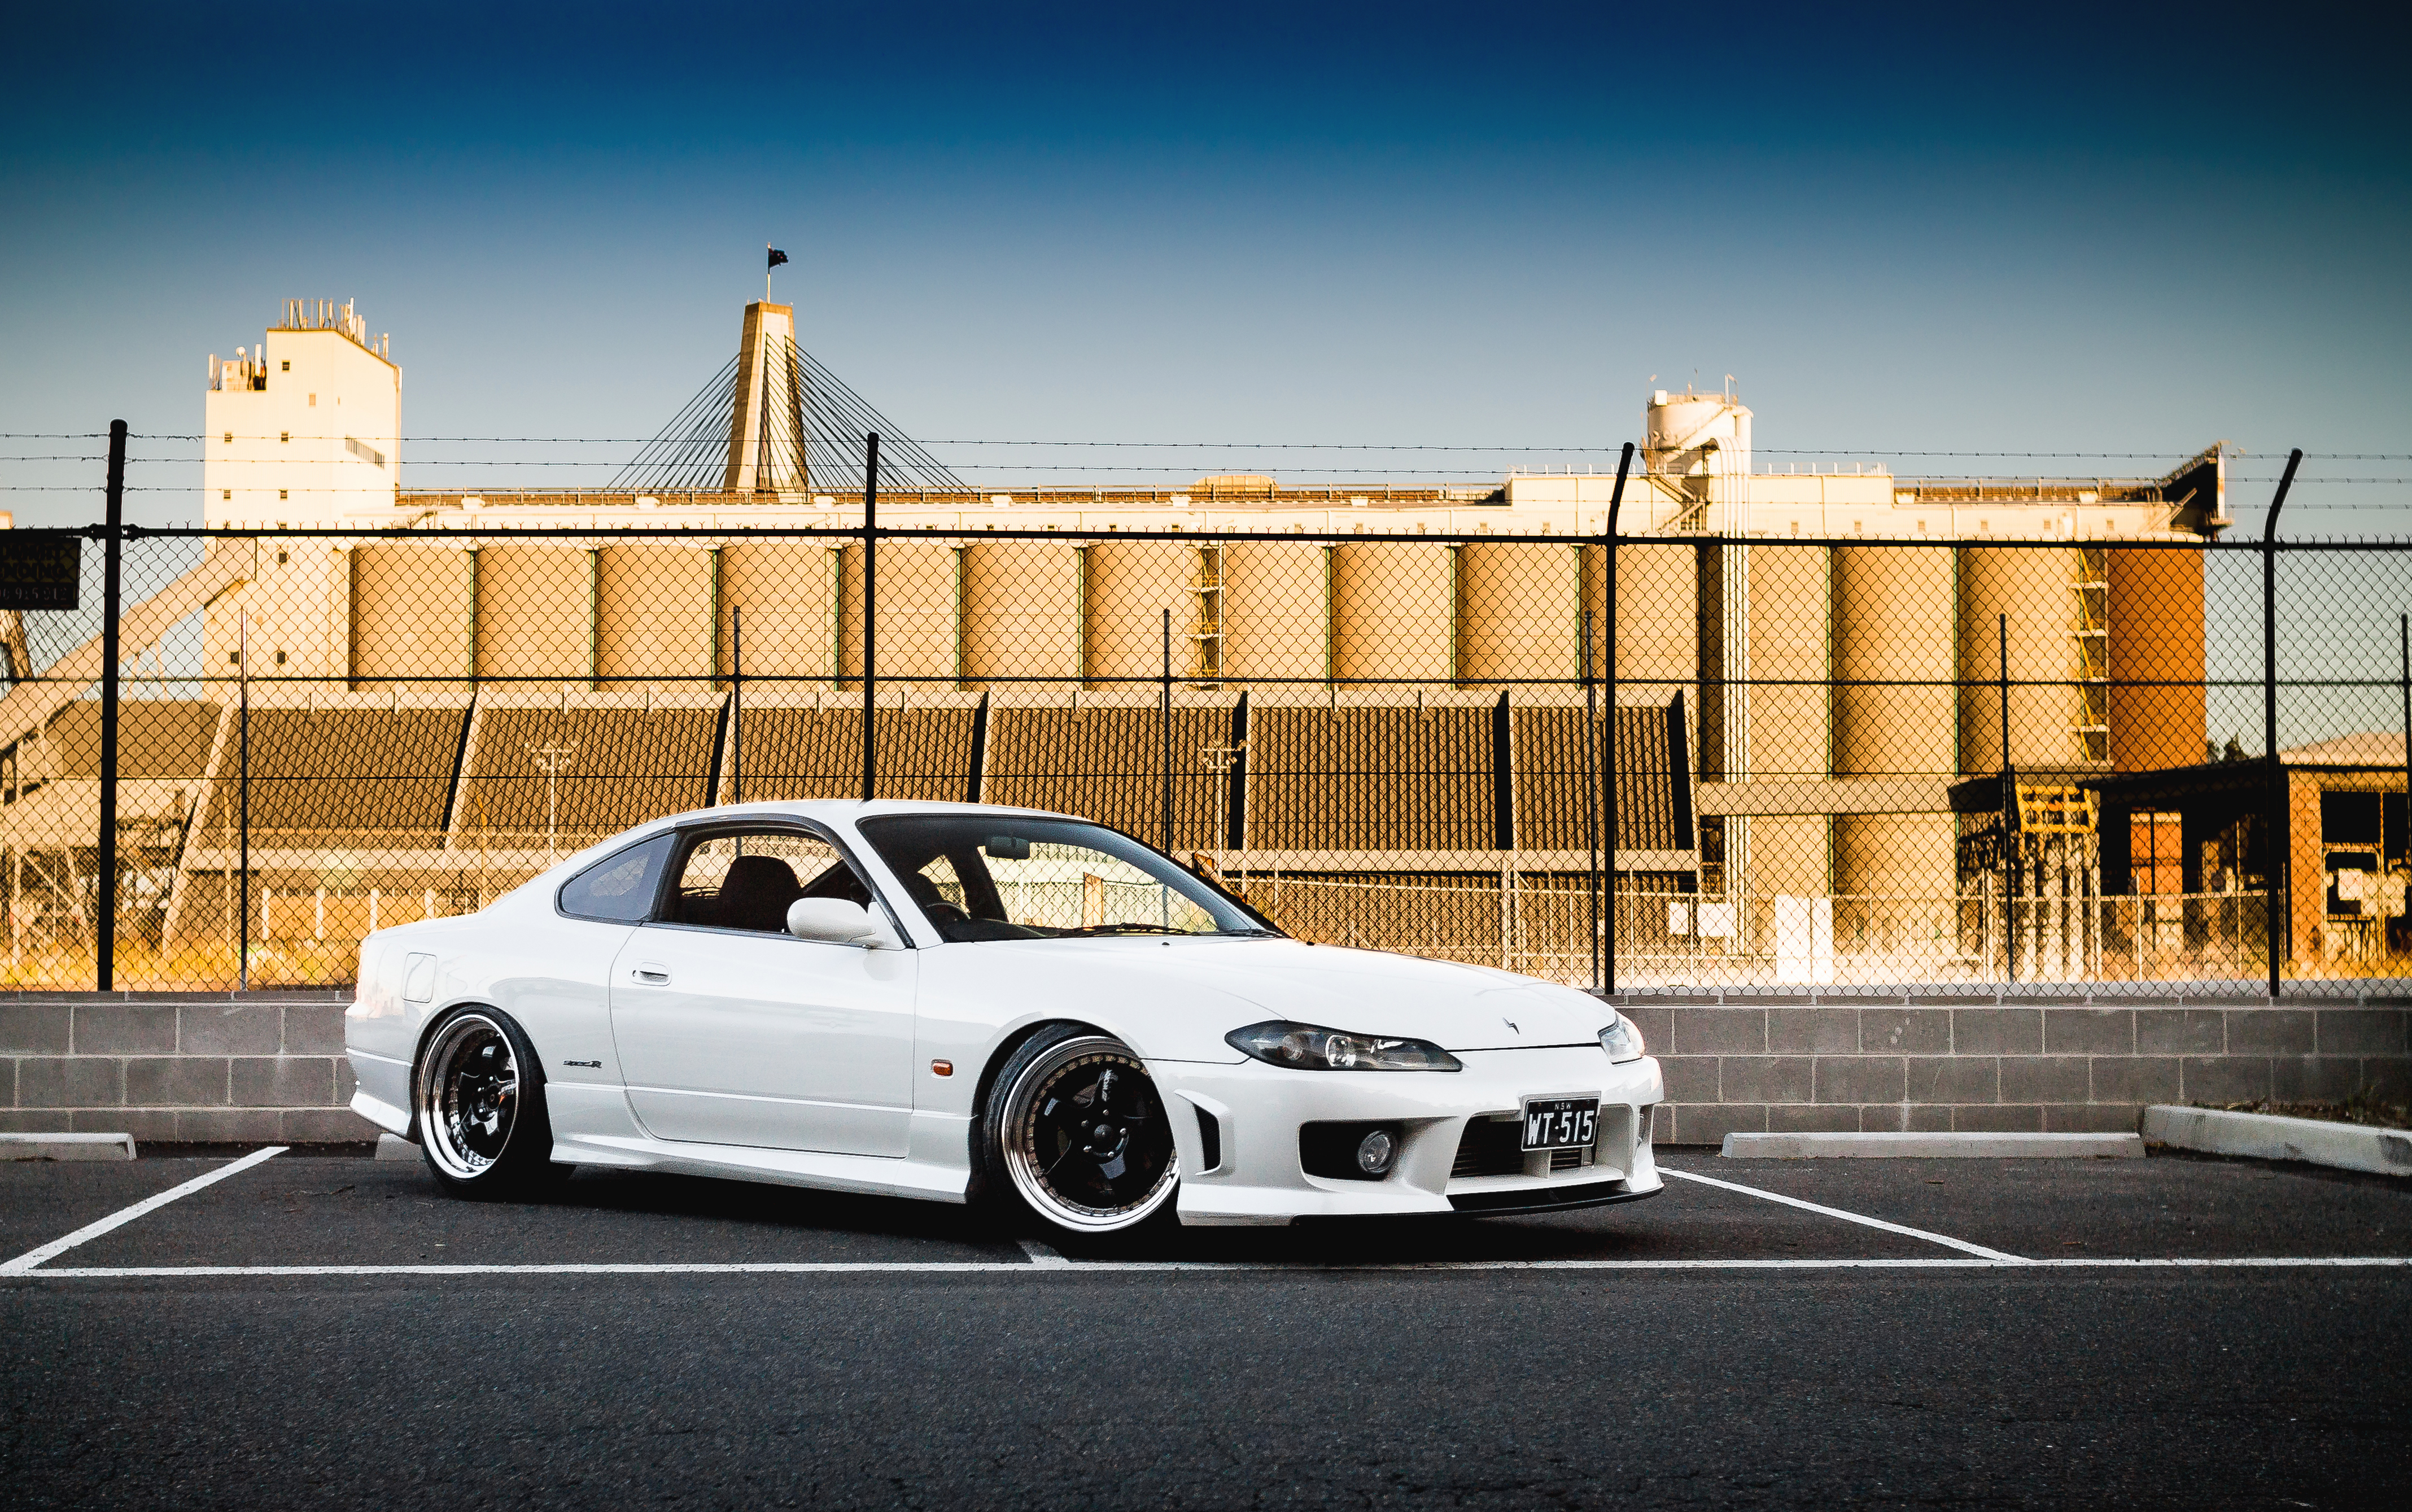 Amazing Nissan Silvia S15 Pictures & Backgrounds